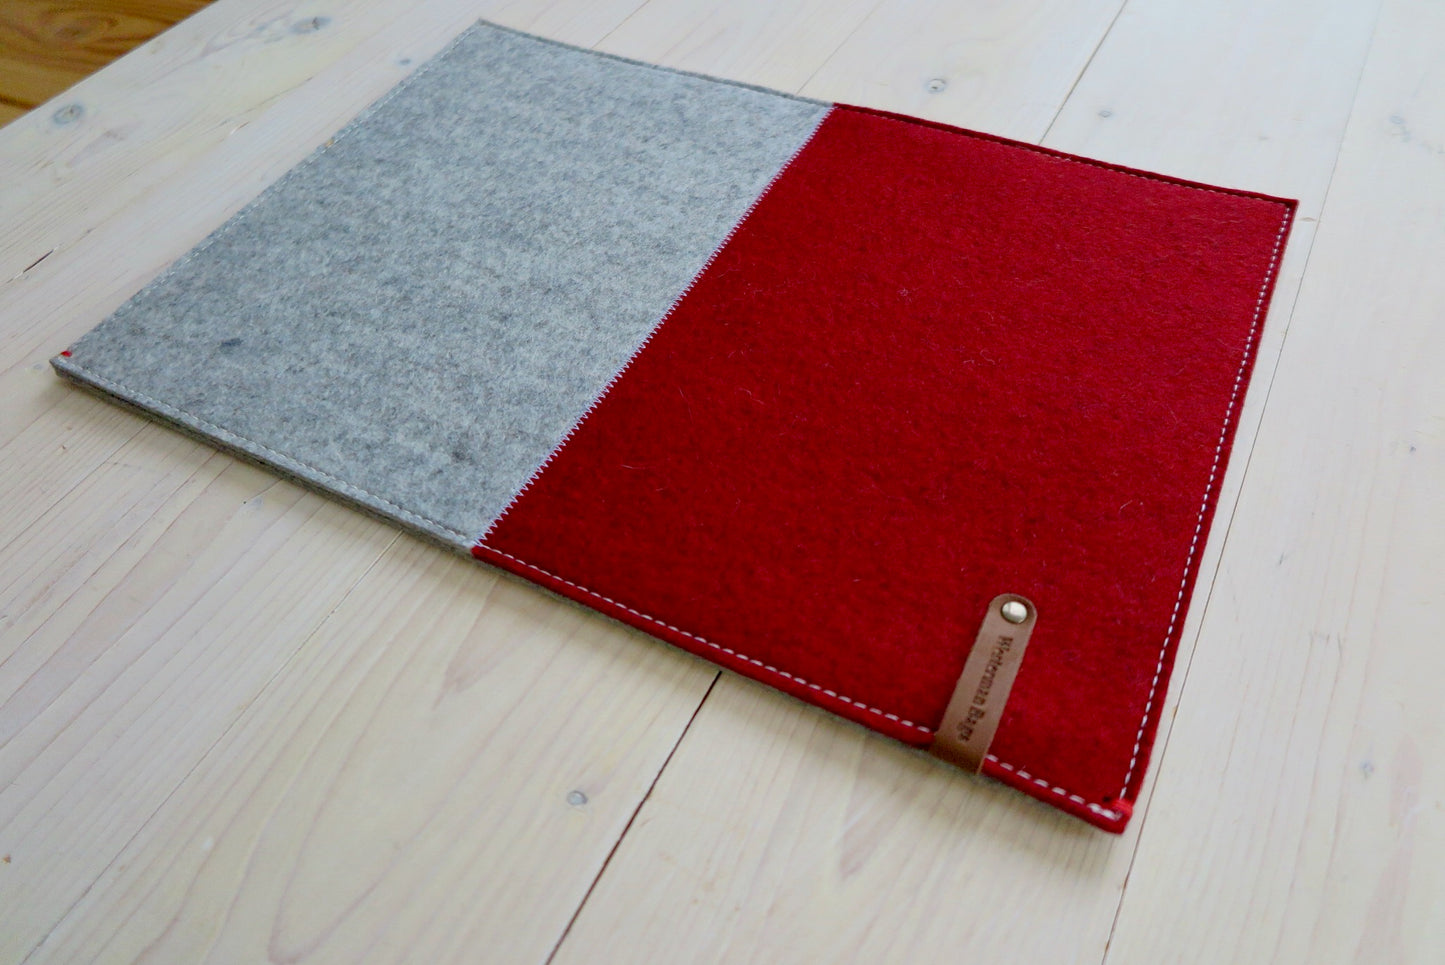 100% wool felt laptop cover in gray and orange, leather closure and extra box